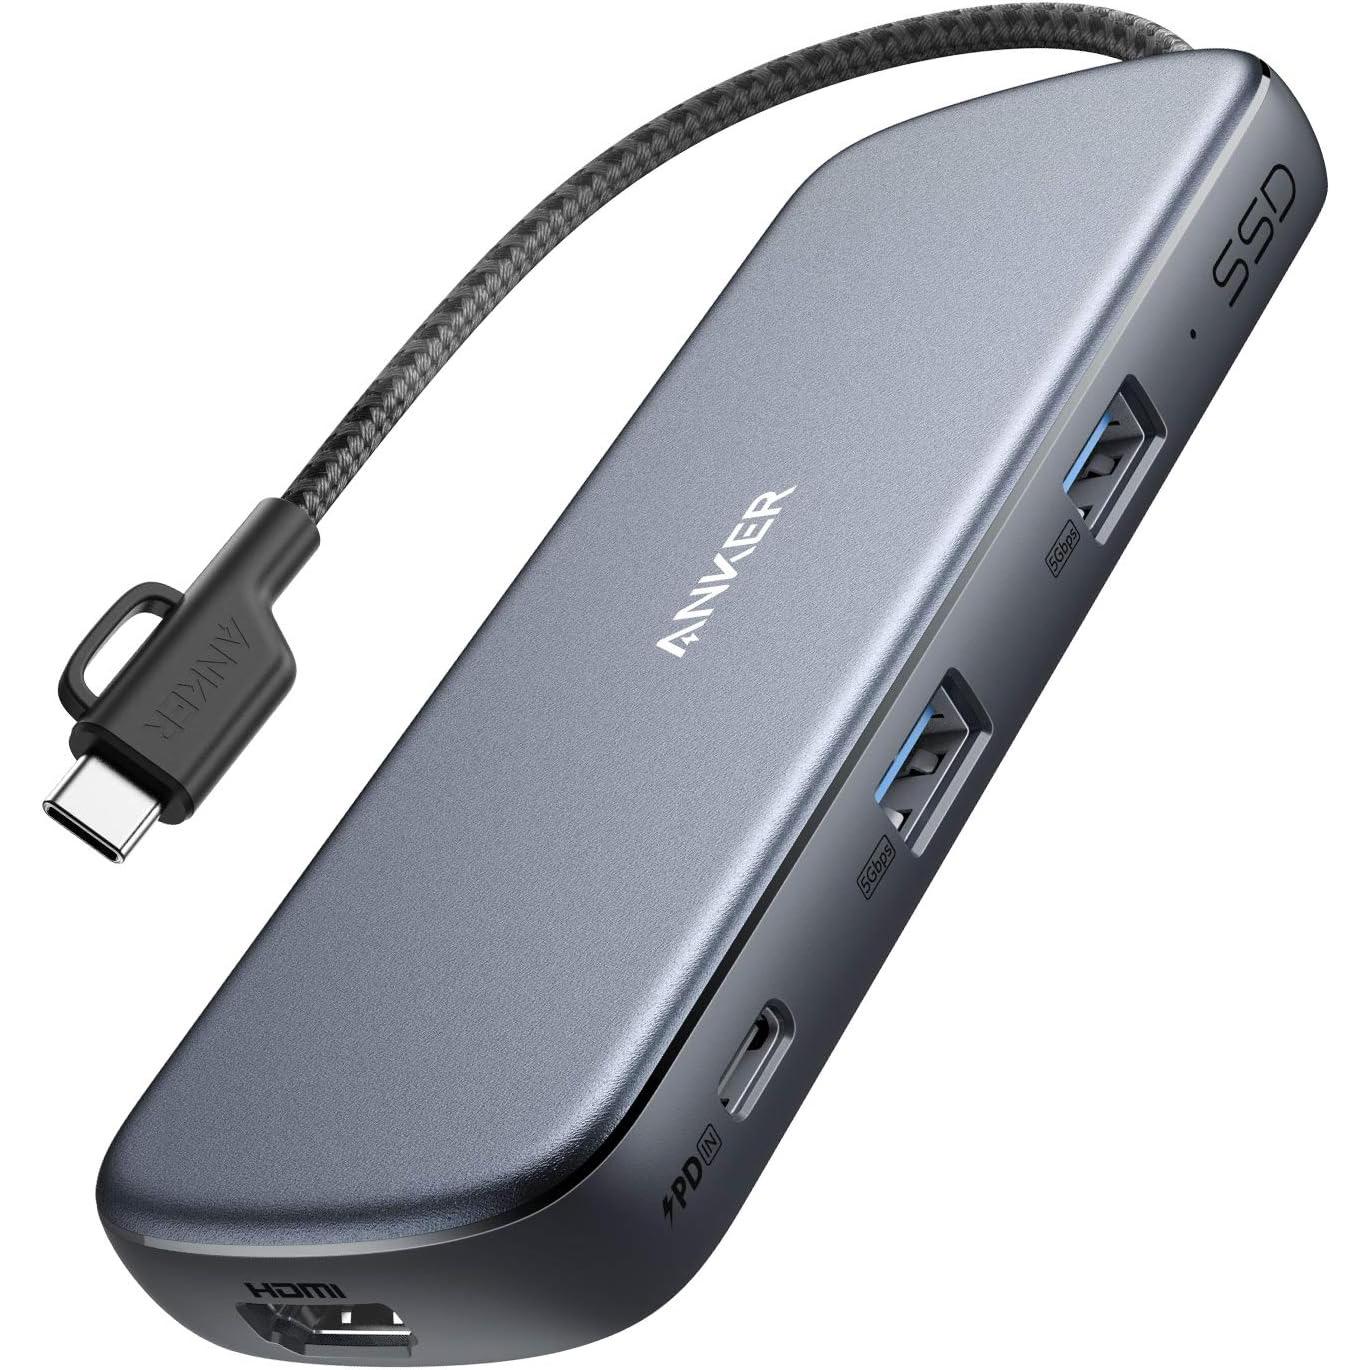 Anker PowerExpand 4-in-1 SSD USB C Hub with 256GB SSD for $34.99